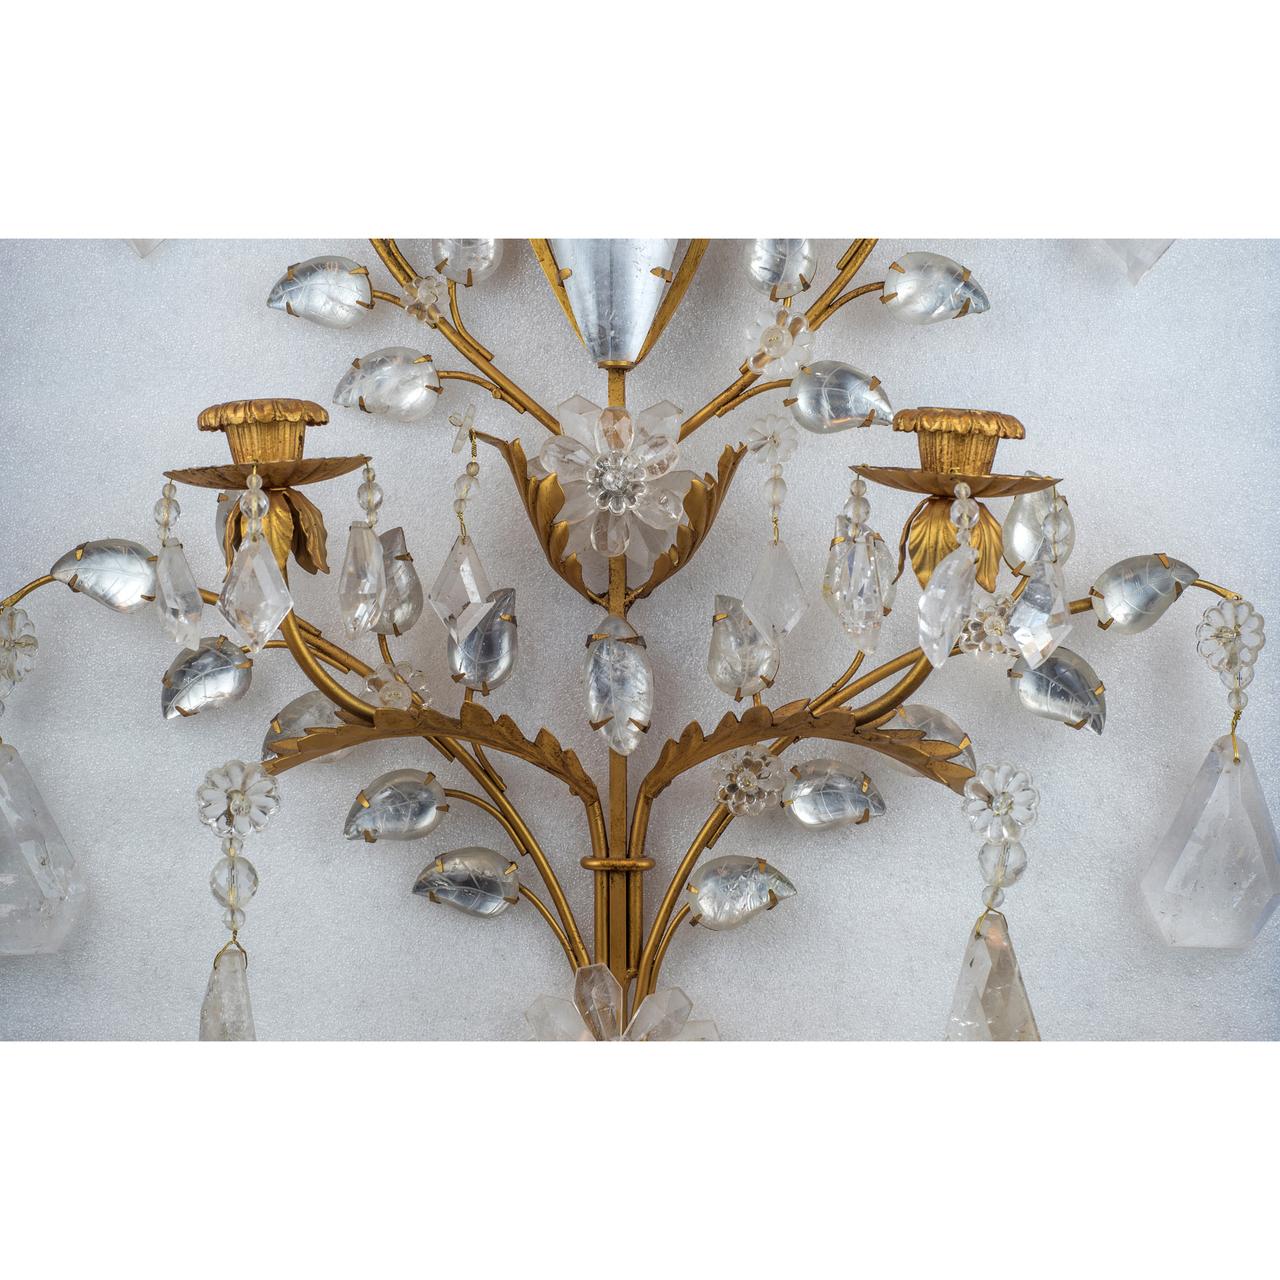 An elegant pair of two-light gilt bronze foliage, carved in rock crystal wall sconces.

Origin: French
Date: 20th century
Dimension: 33 in. x 21 1/2 in. x 5 in.